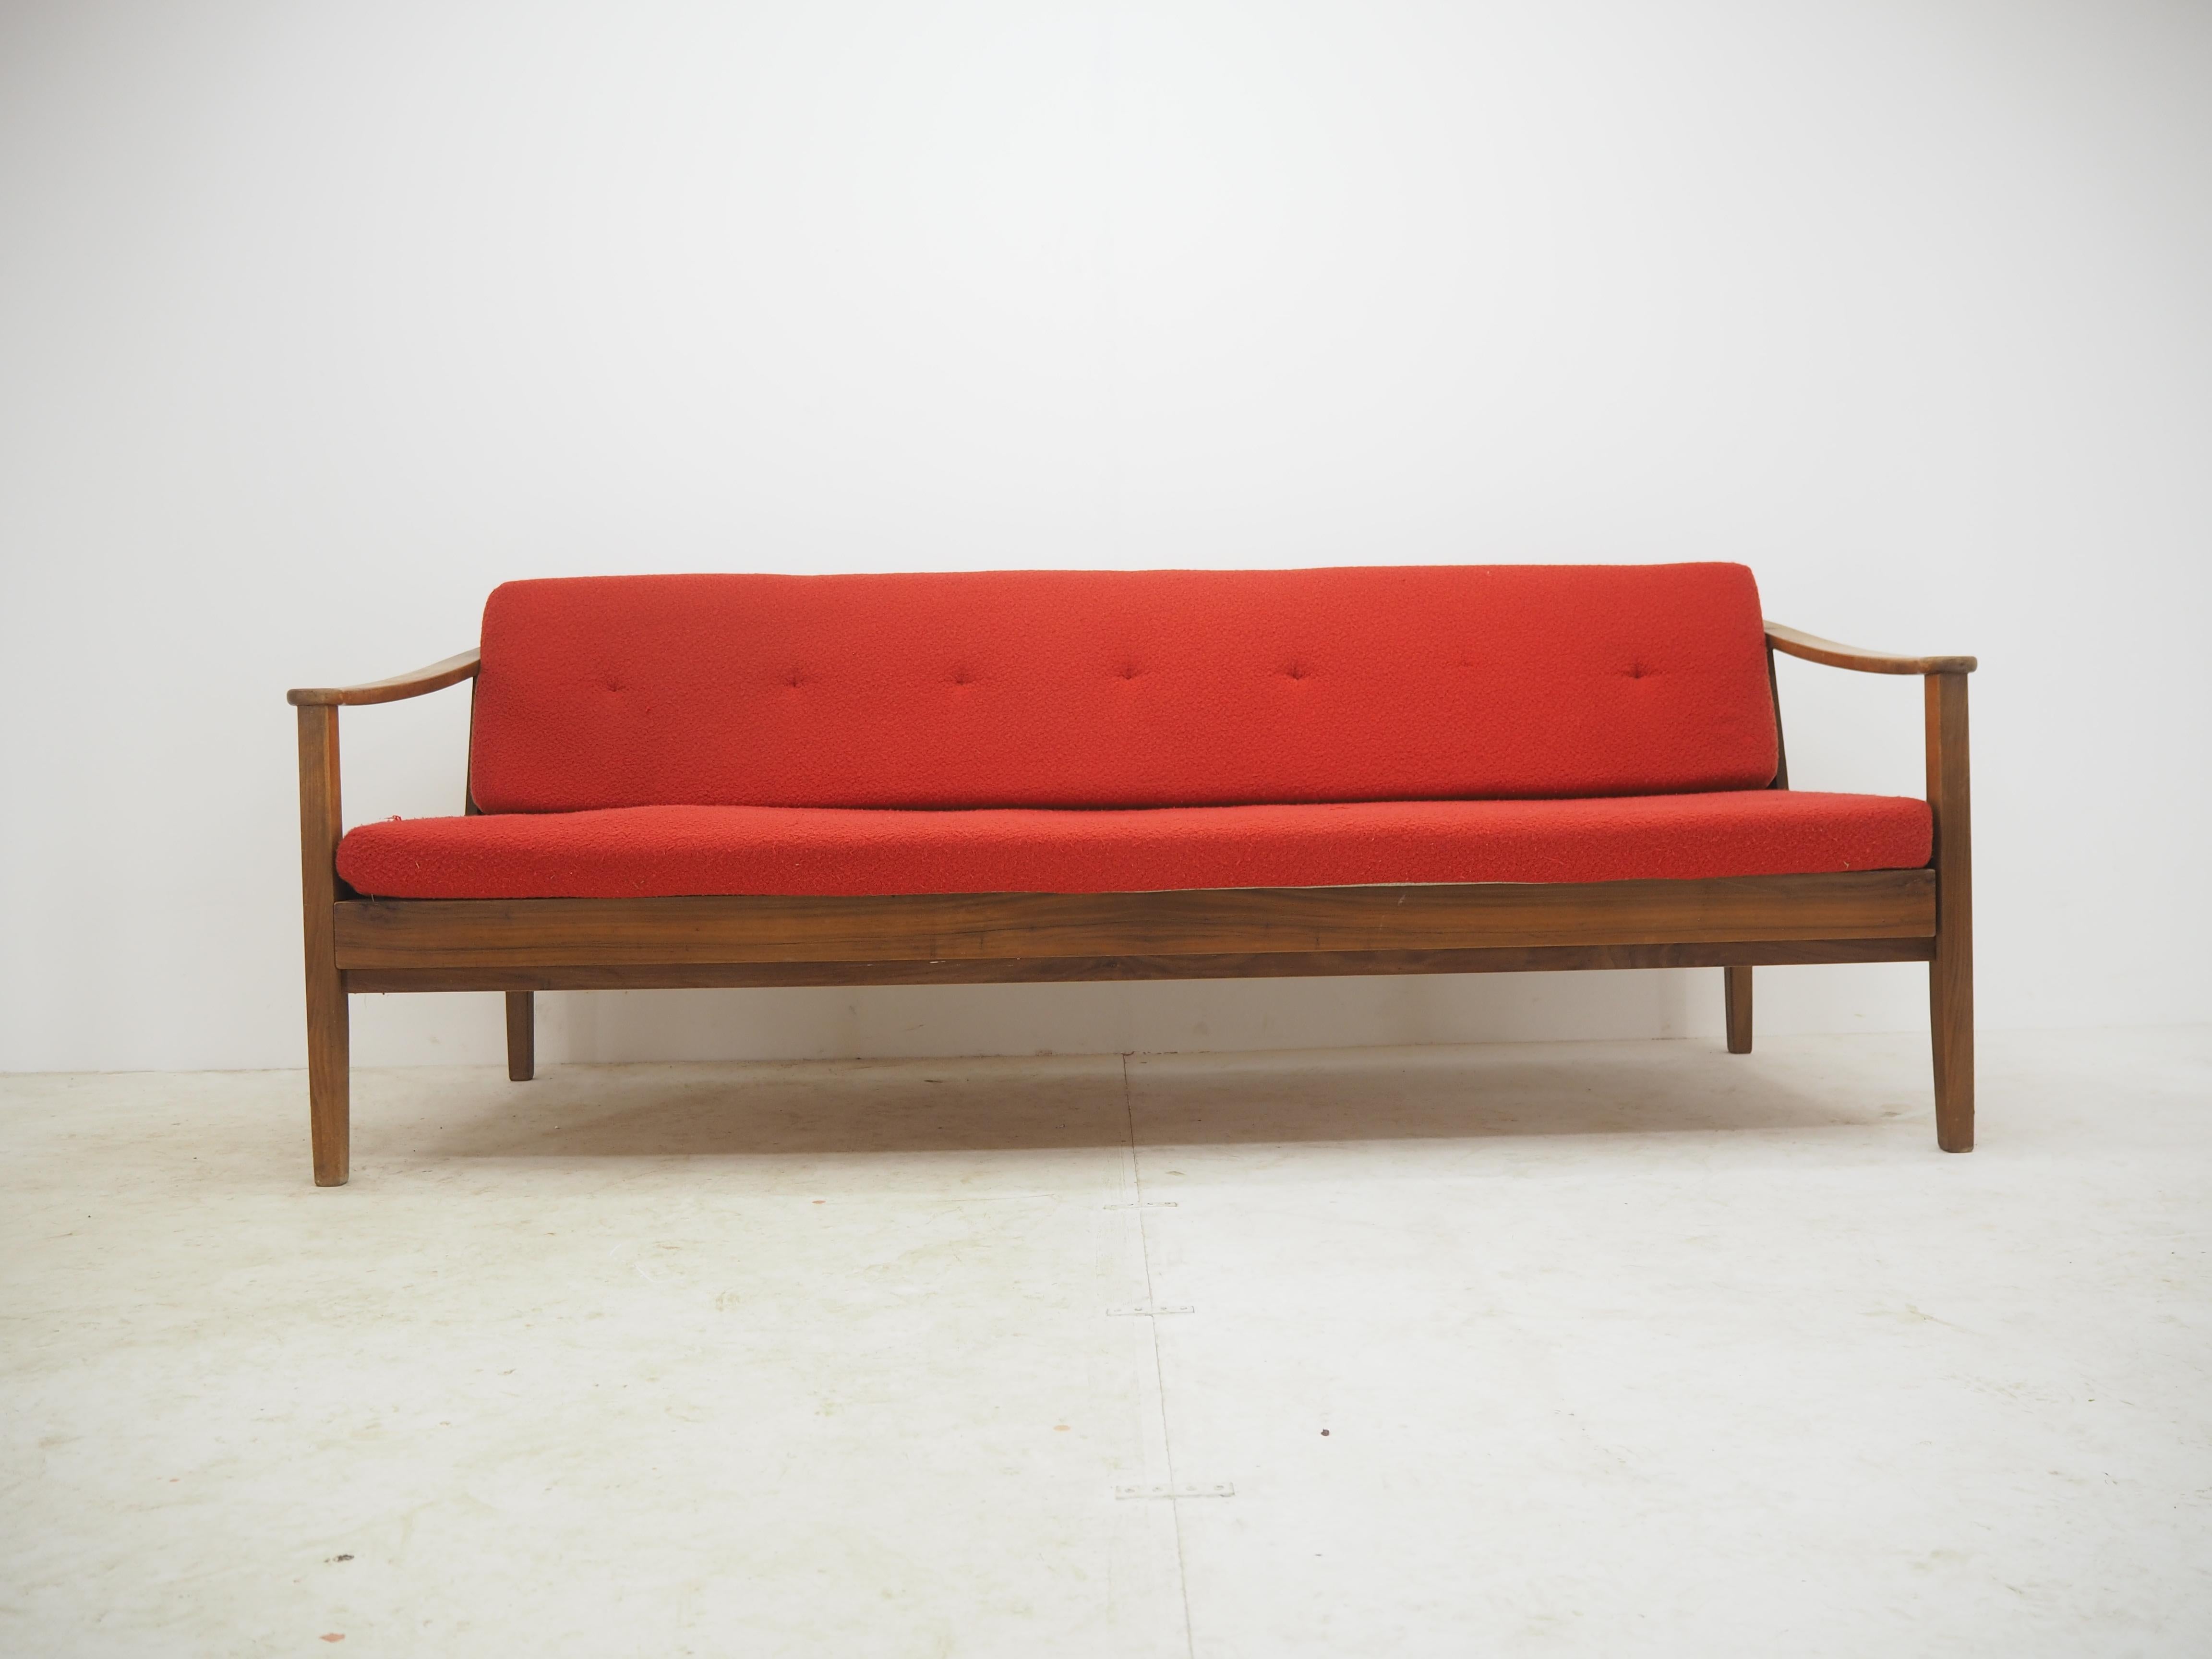 Made in Czechoslovakia 
Sofa is 70 x 202 x 80- 180
in original condition 
need a renovation
sofa is convertible.